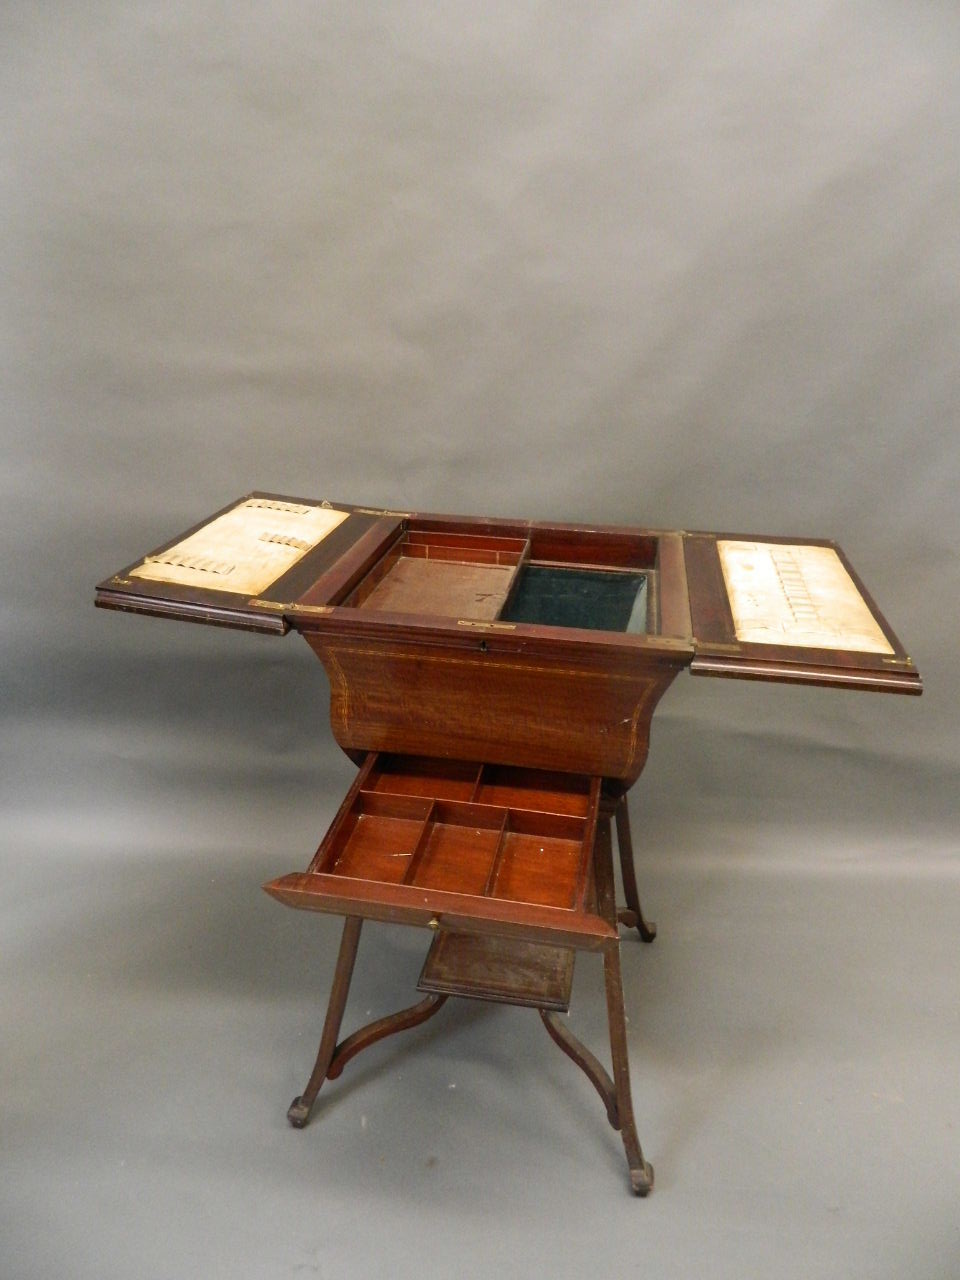 An Edwardian inlaid mahogany work box with single drawer and top flaps opening to reveal a slide and - Image 3 of 5